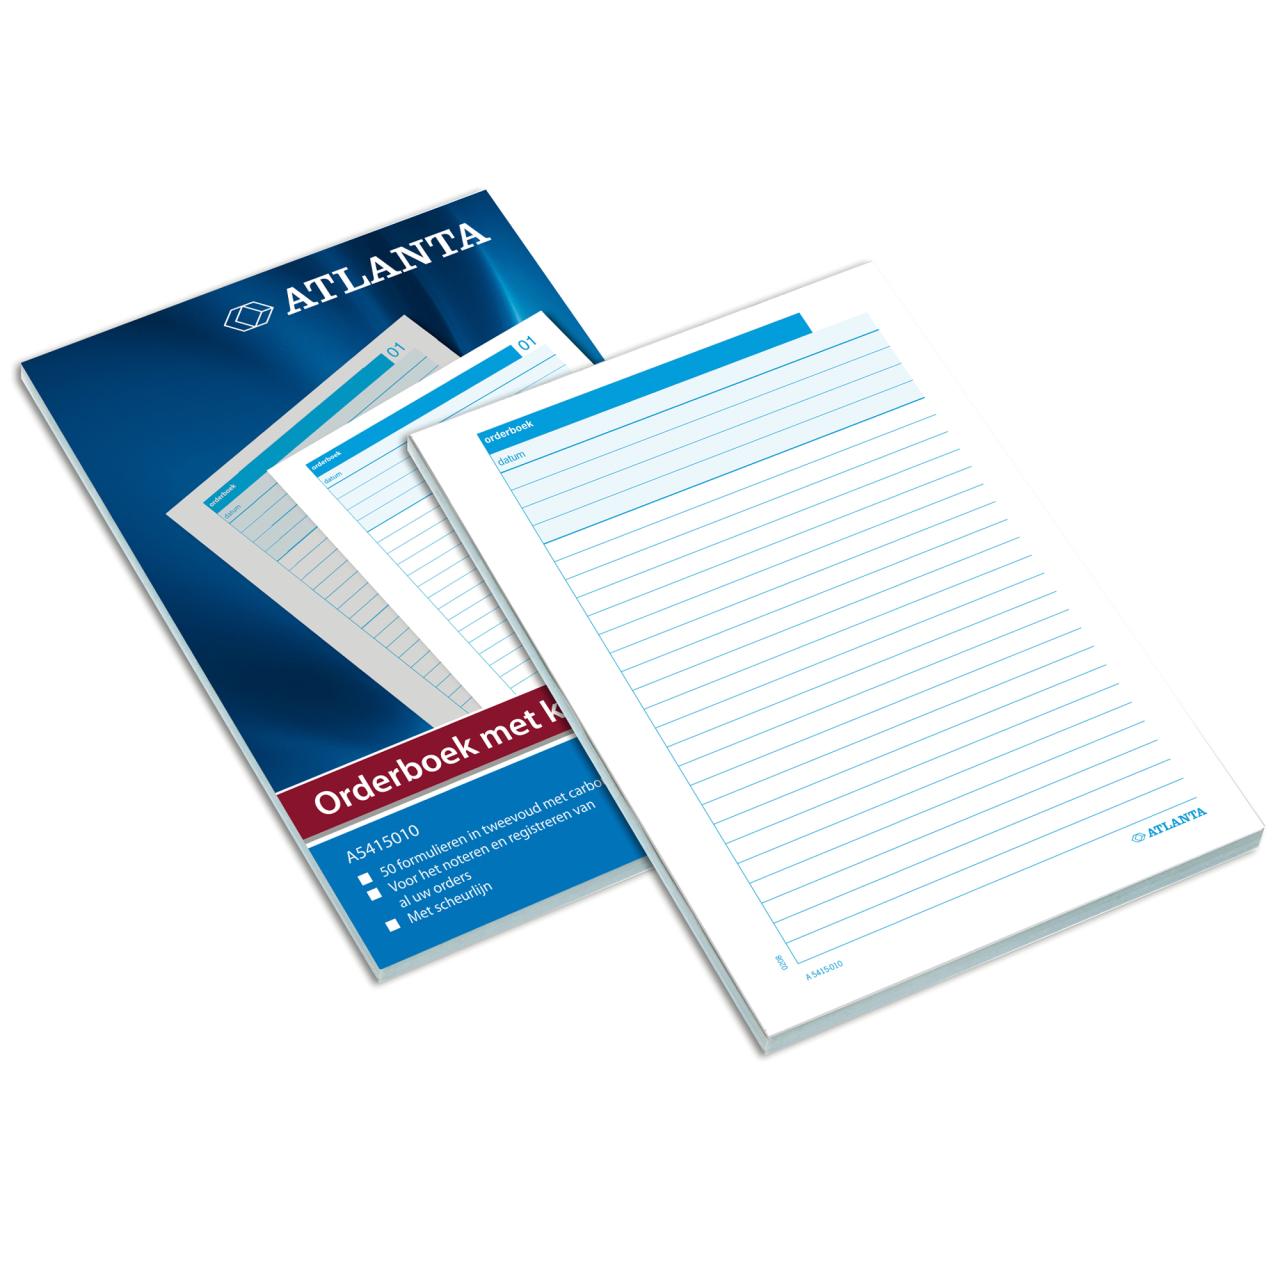 Atlanta Delivery book, with copy (carbon), NL text, FSC®